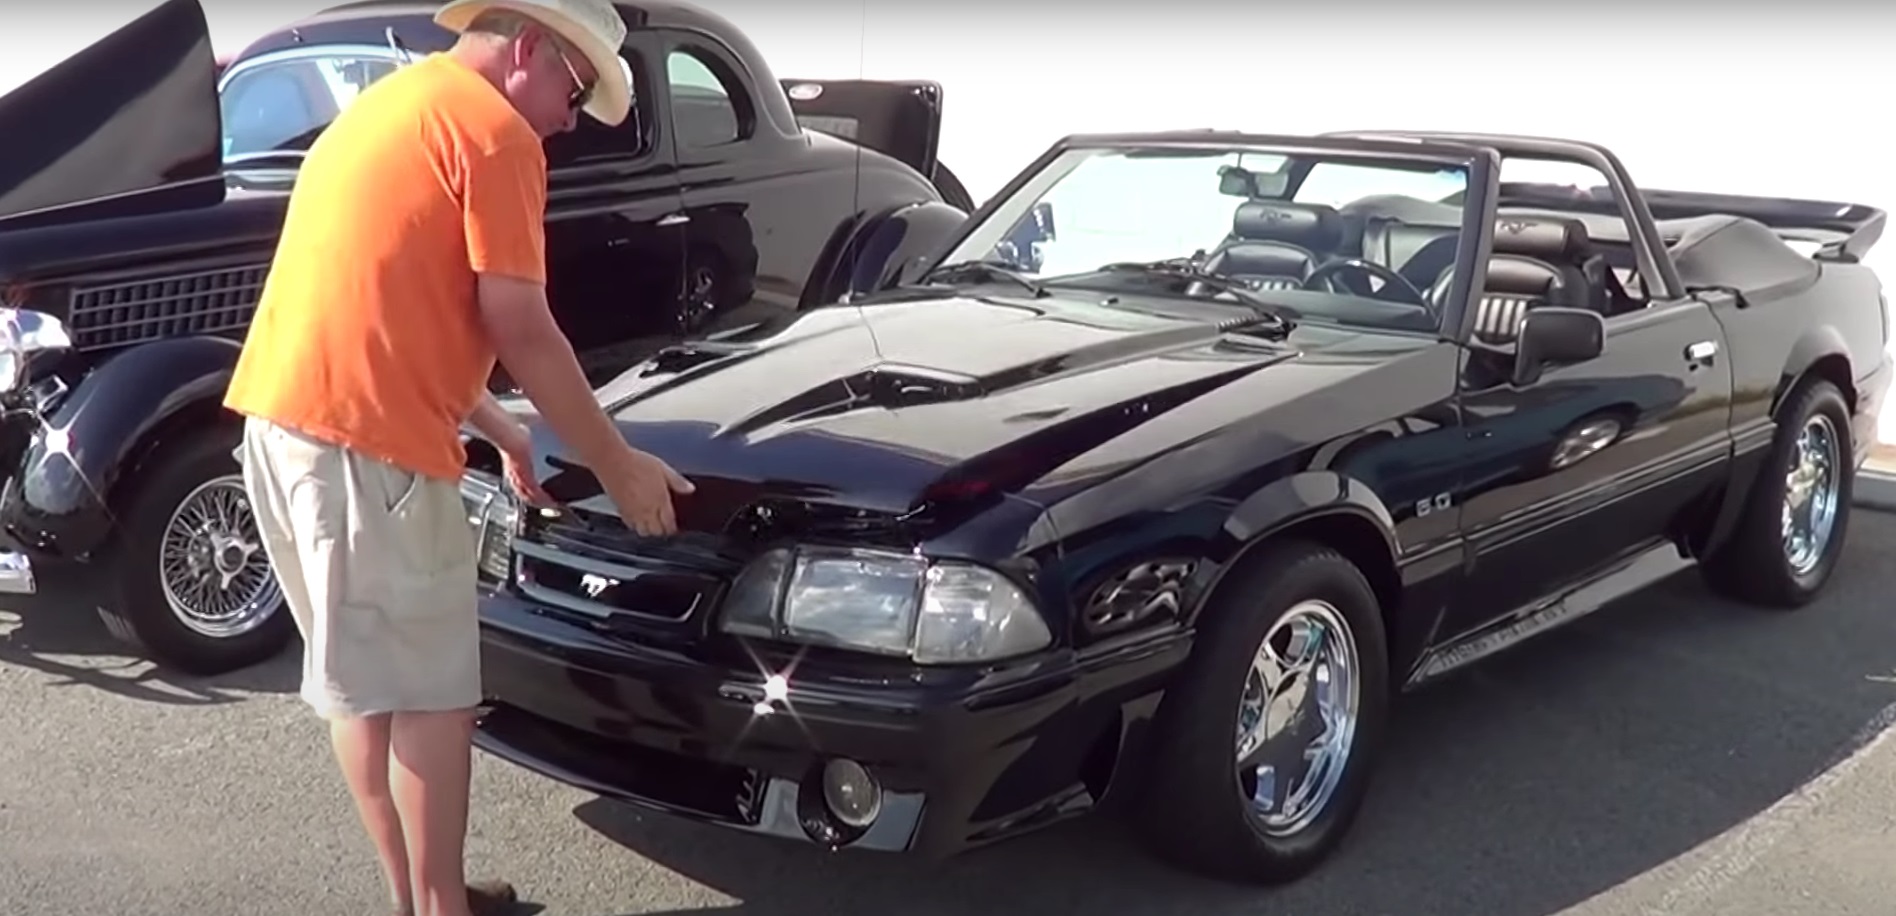 Video: 1993 Ford Mustang GT Convertible Full Walkaround